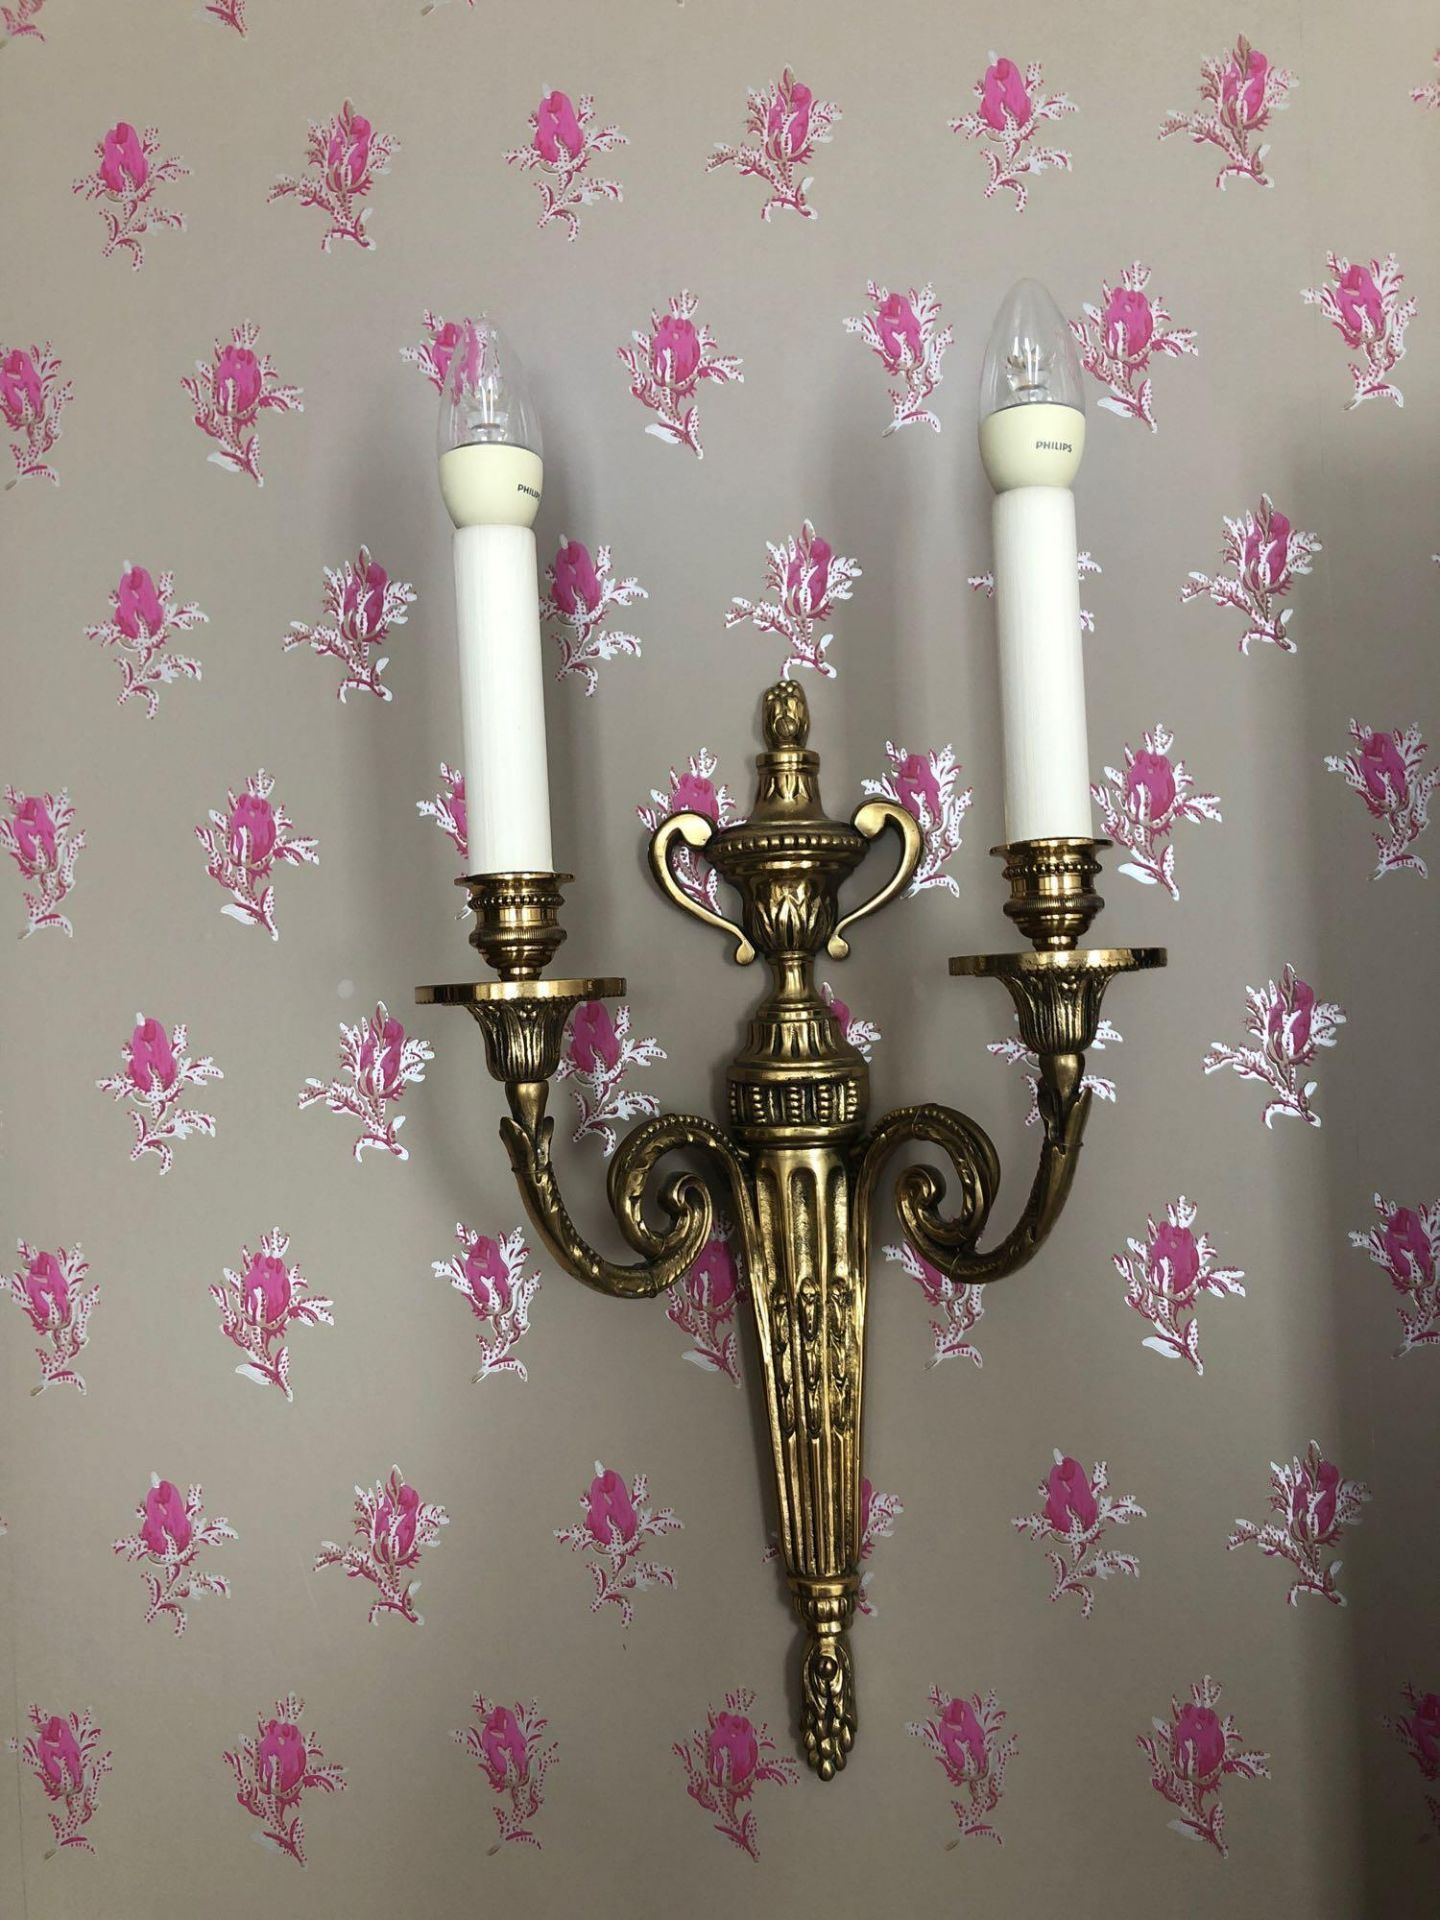 A Pair Of Wall Appliques Twin Arm Capped Scroll Arms Issuing From A Well-Cast Single Decorative